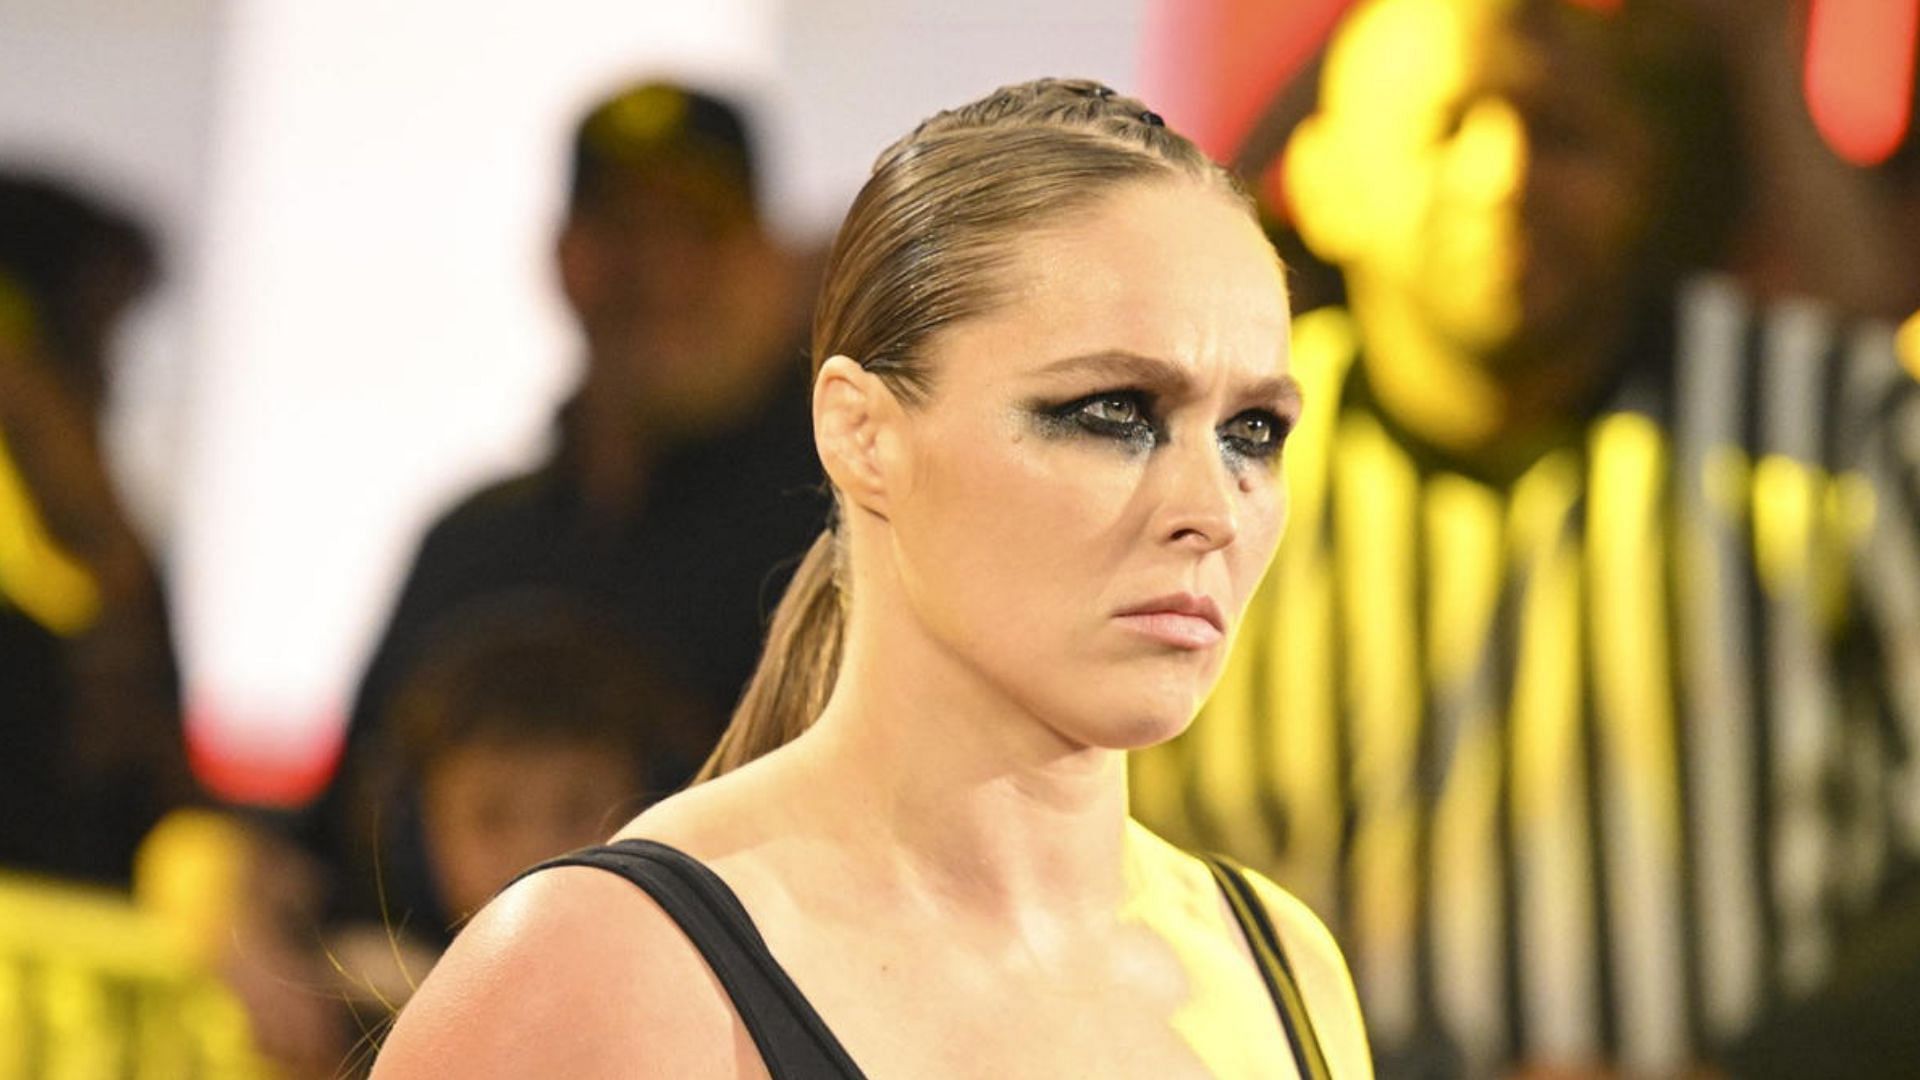 WWE Rising Superstar says she gave Ronda Rousey one of the best